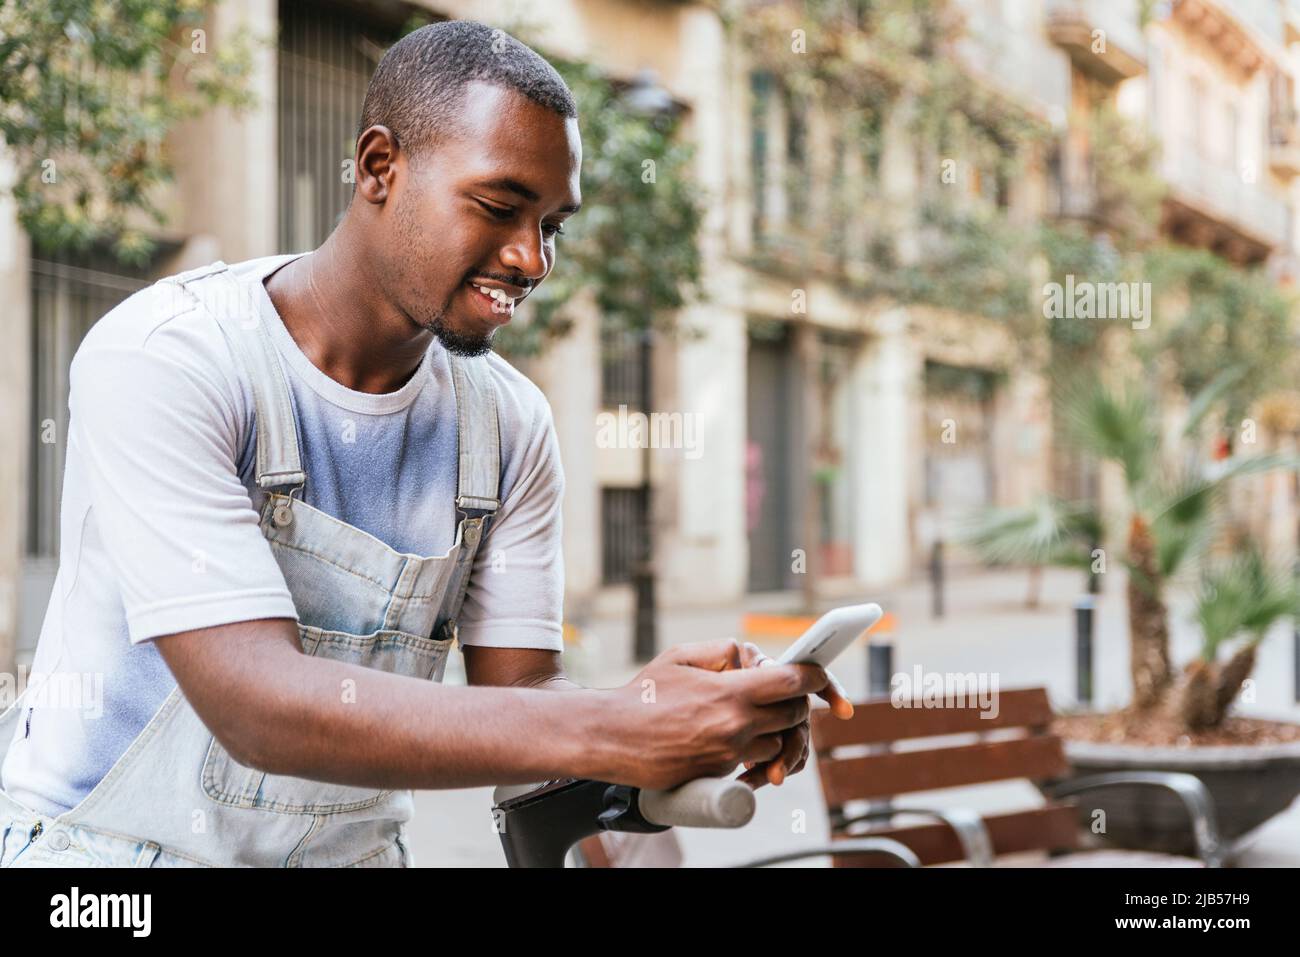 Positive young black male millennial with dark hair and beard smiling and  messaging on mobile phone while leaning on kick scooter on city street  Stock Photo - Alamy